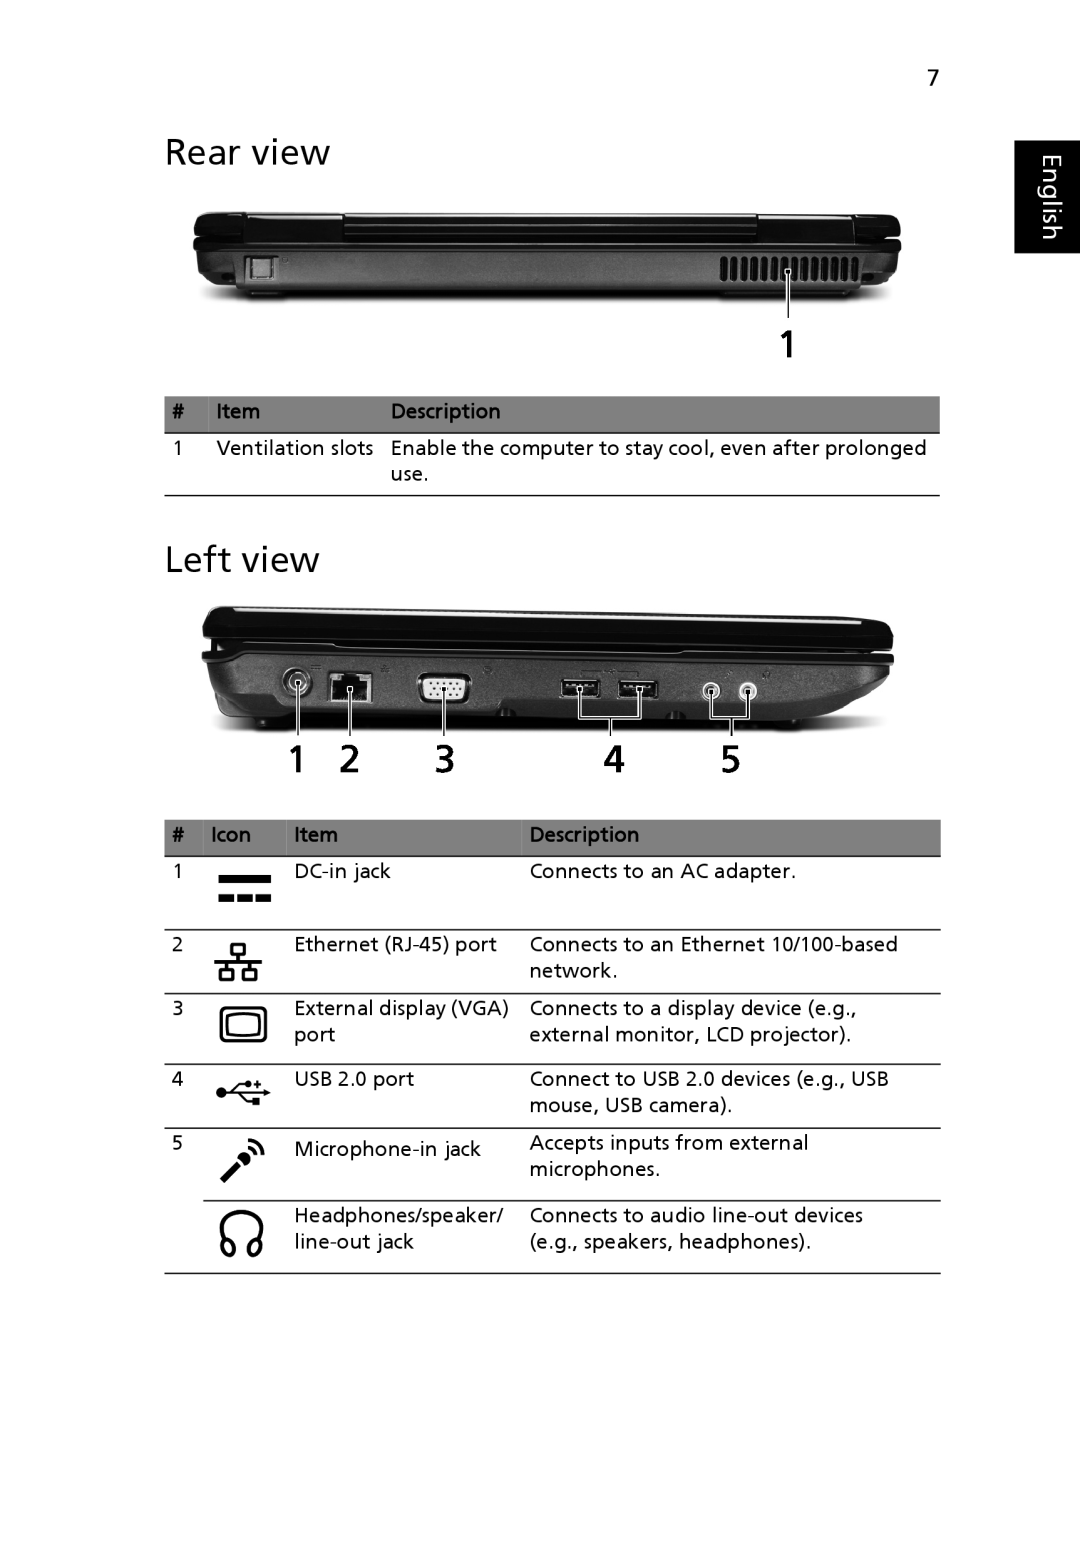 Acer 5516 Series manual Rear view, Left view, English 